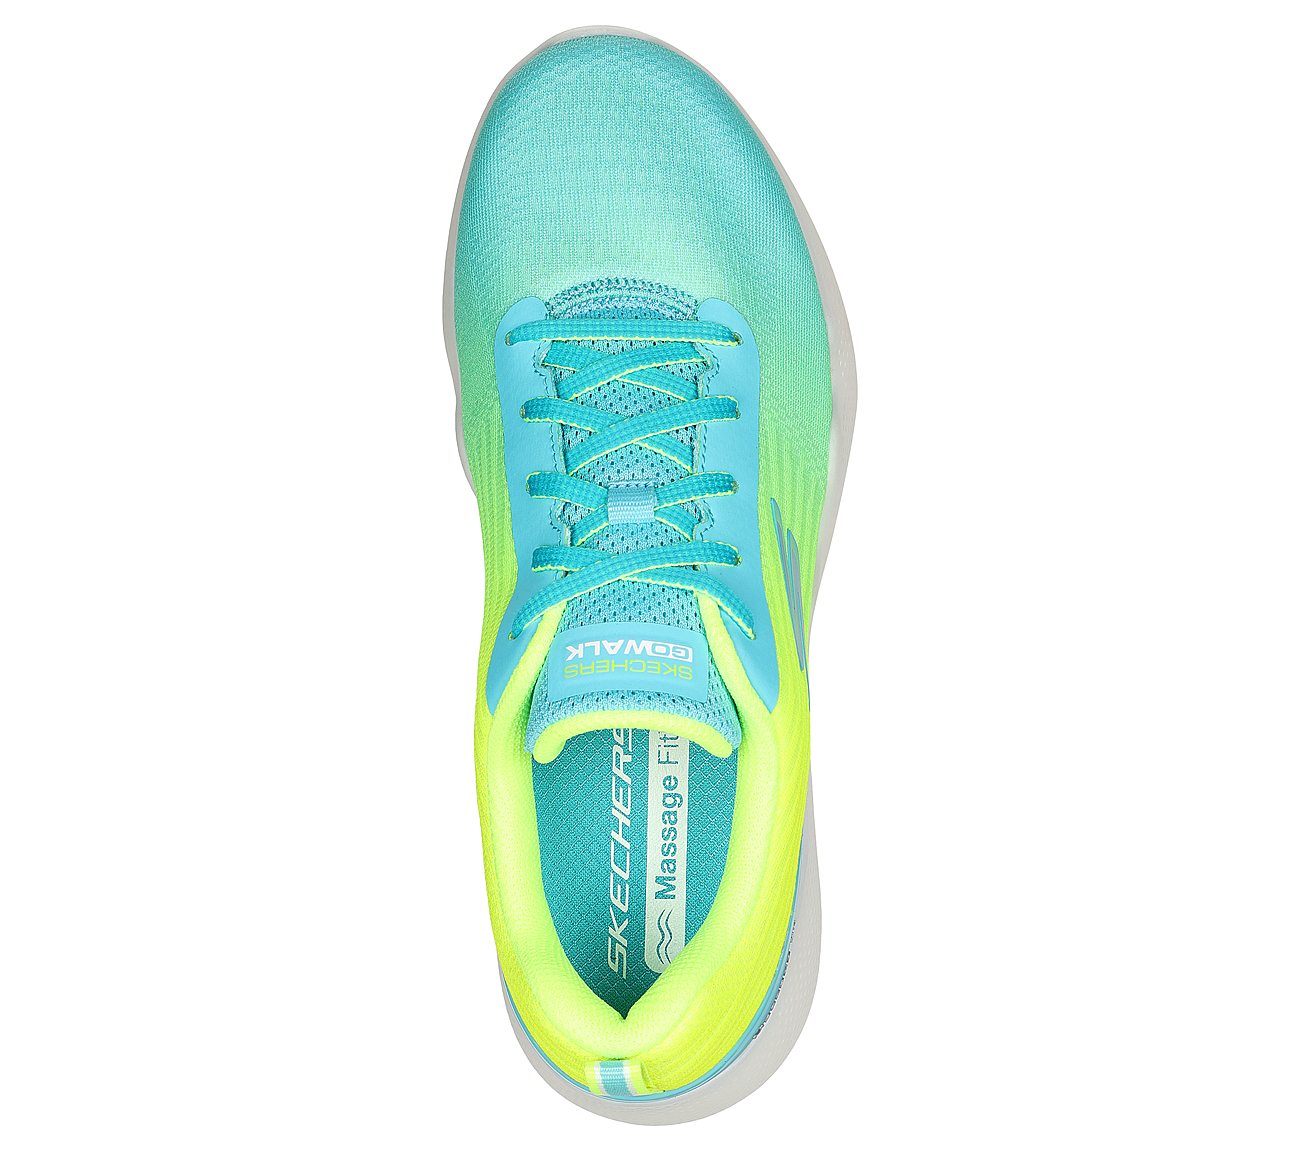 GO WALK MASSAGE FIT, TURQUOISE/LIME Footwear Top View